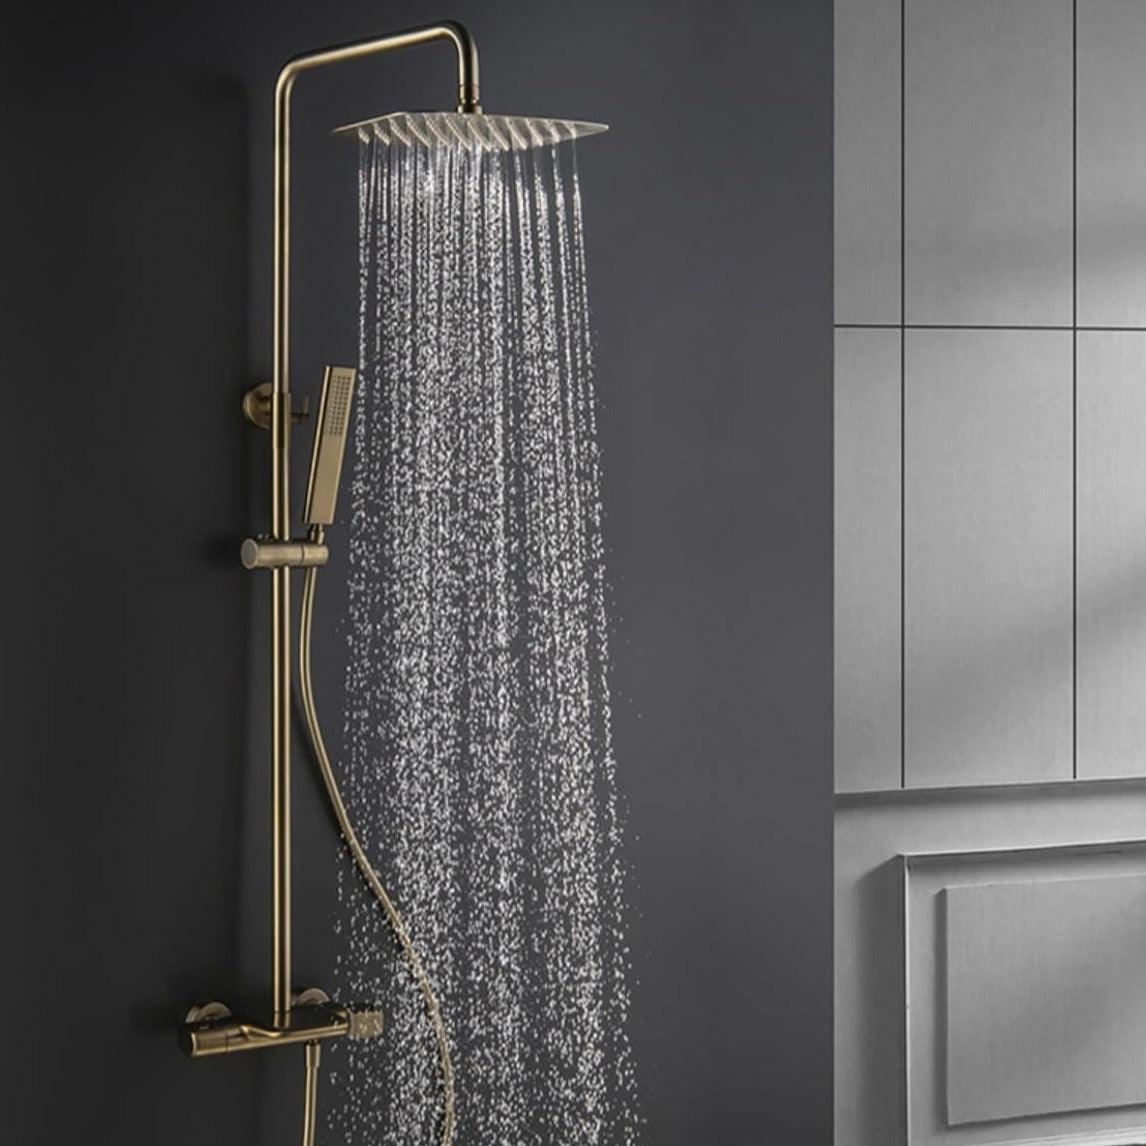 SCALIA / Brass Shower System - Handle Shop Couture 